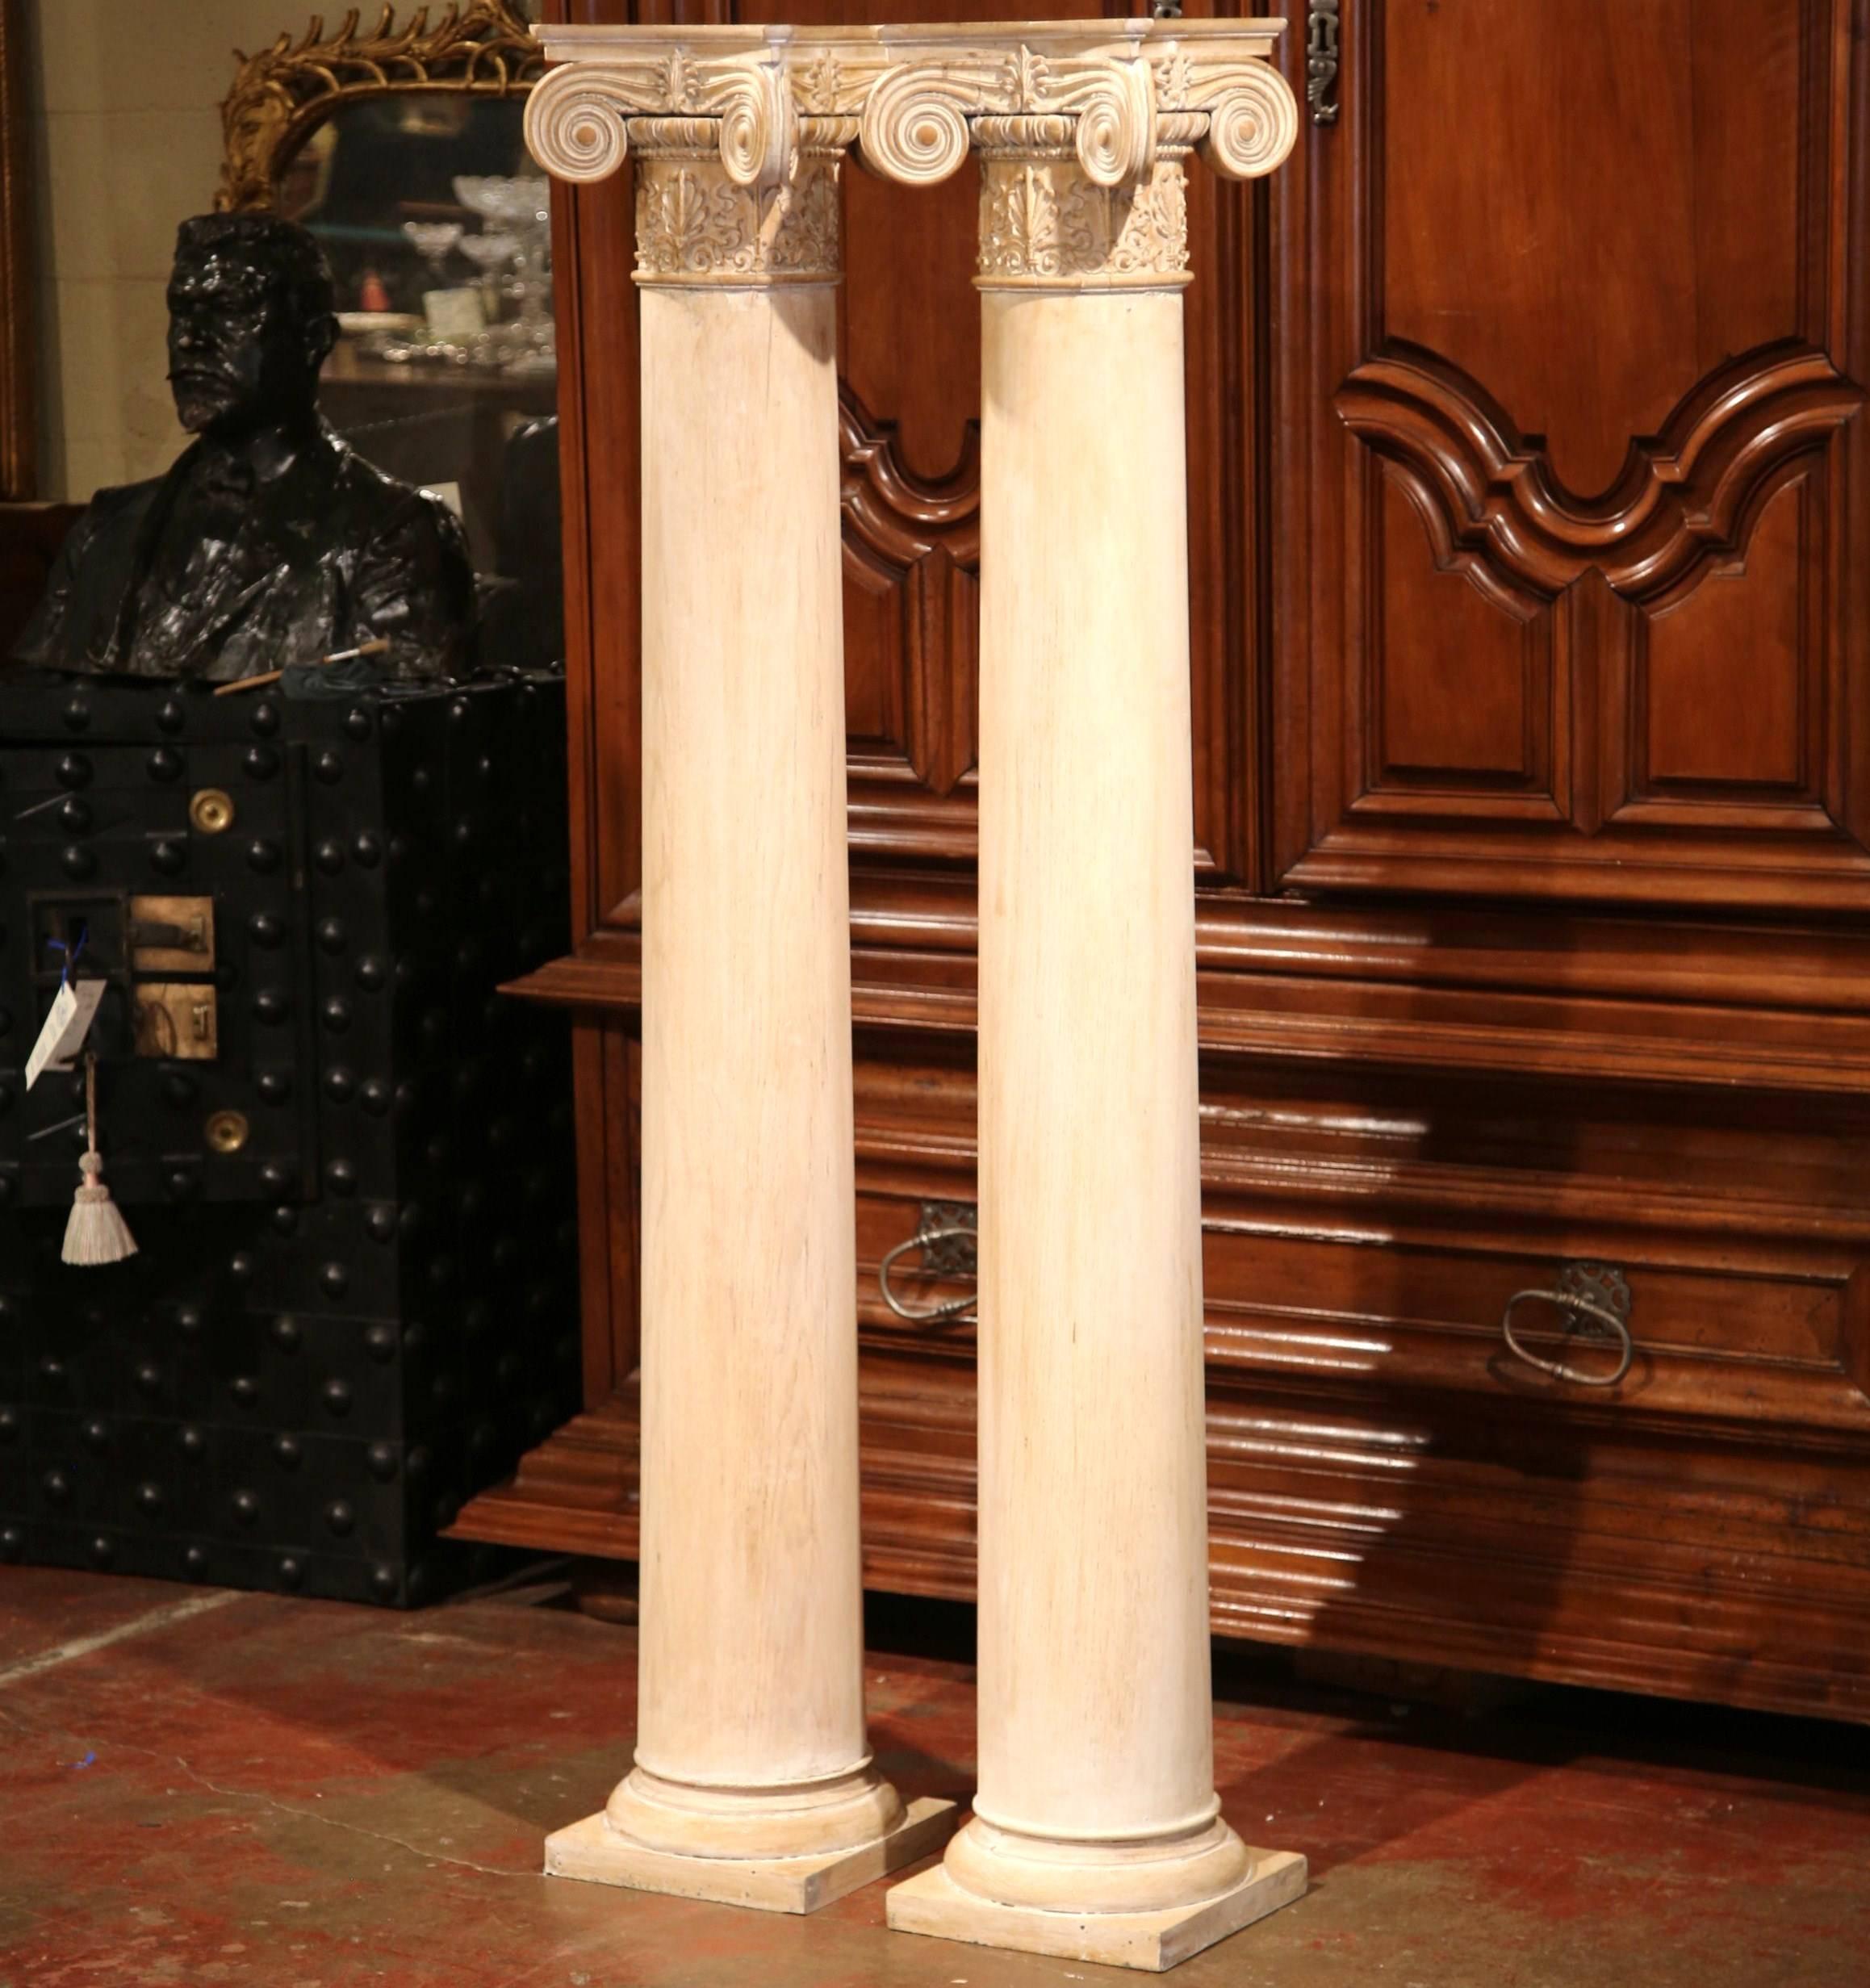 Elegant pair of antique columns from France; crafted circa 1860, each tall column features a square top with hand-carved fleurs de lys and large scrolls at each corner, a round stem and square base at the bottom. The pedestals are in excellent